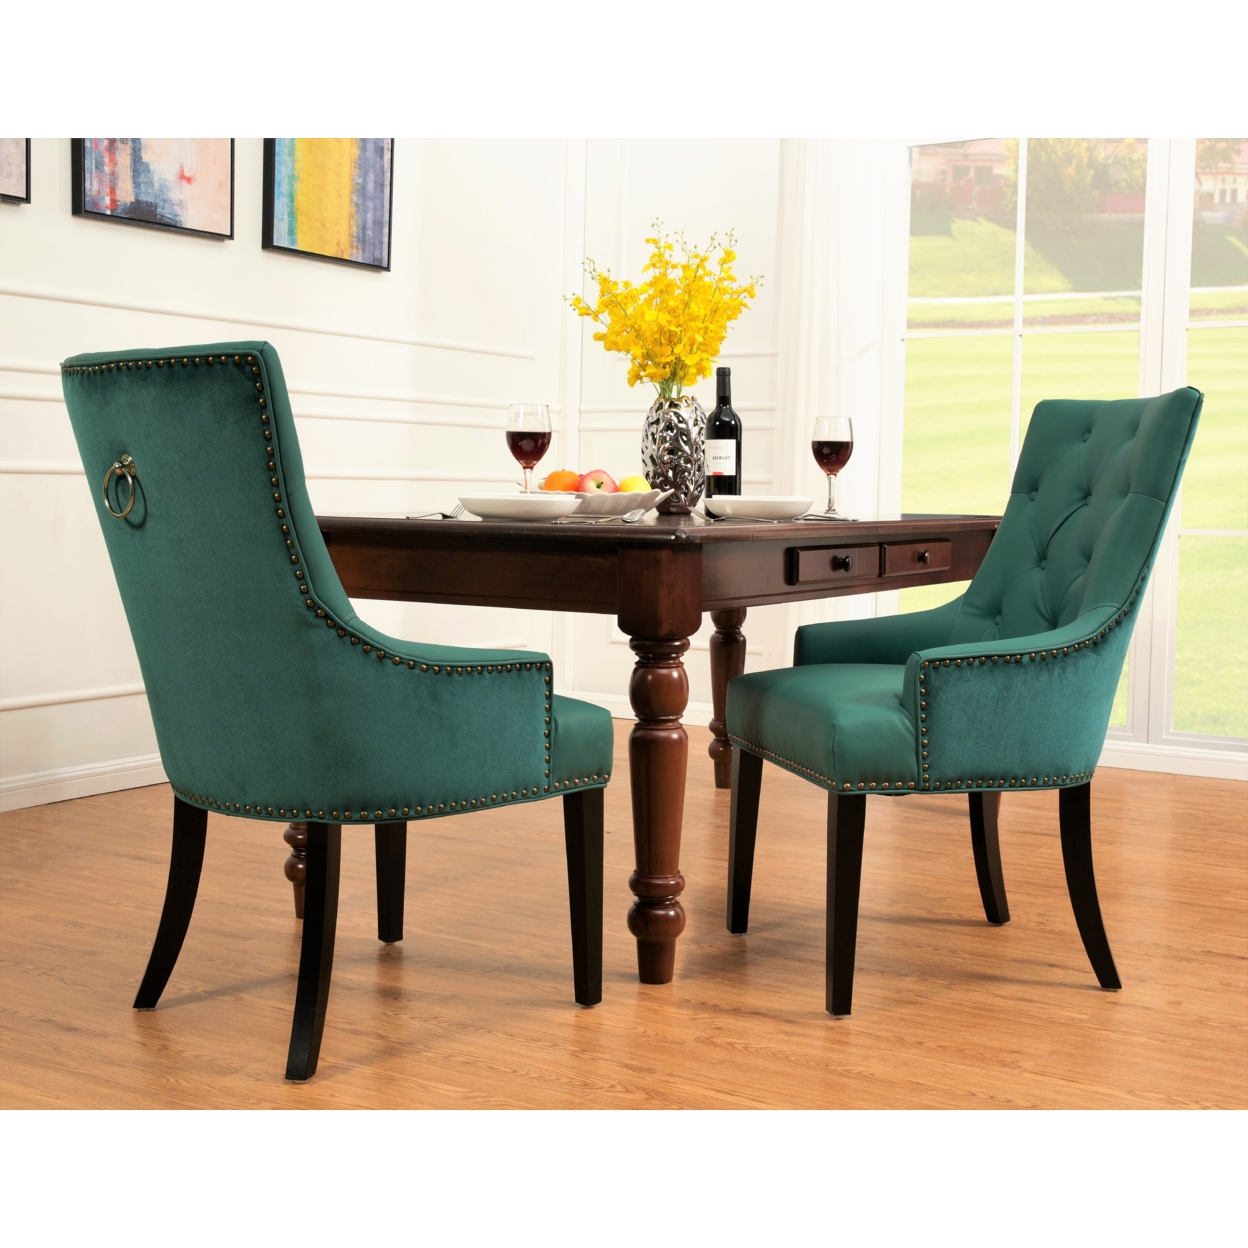 Gideon 2 Pc. Dining Side Chair PU Leather Velvet Polished Brass Nailheads Espresso Finished Wooden Legs - Green